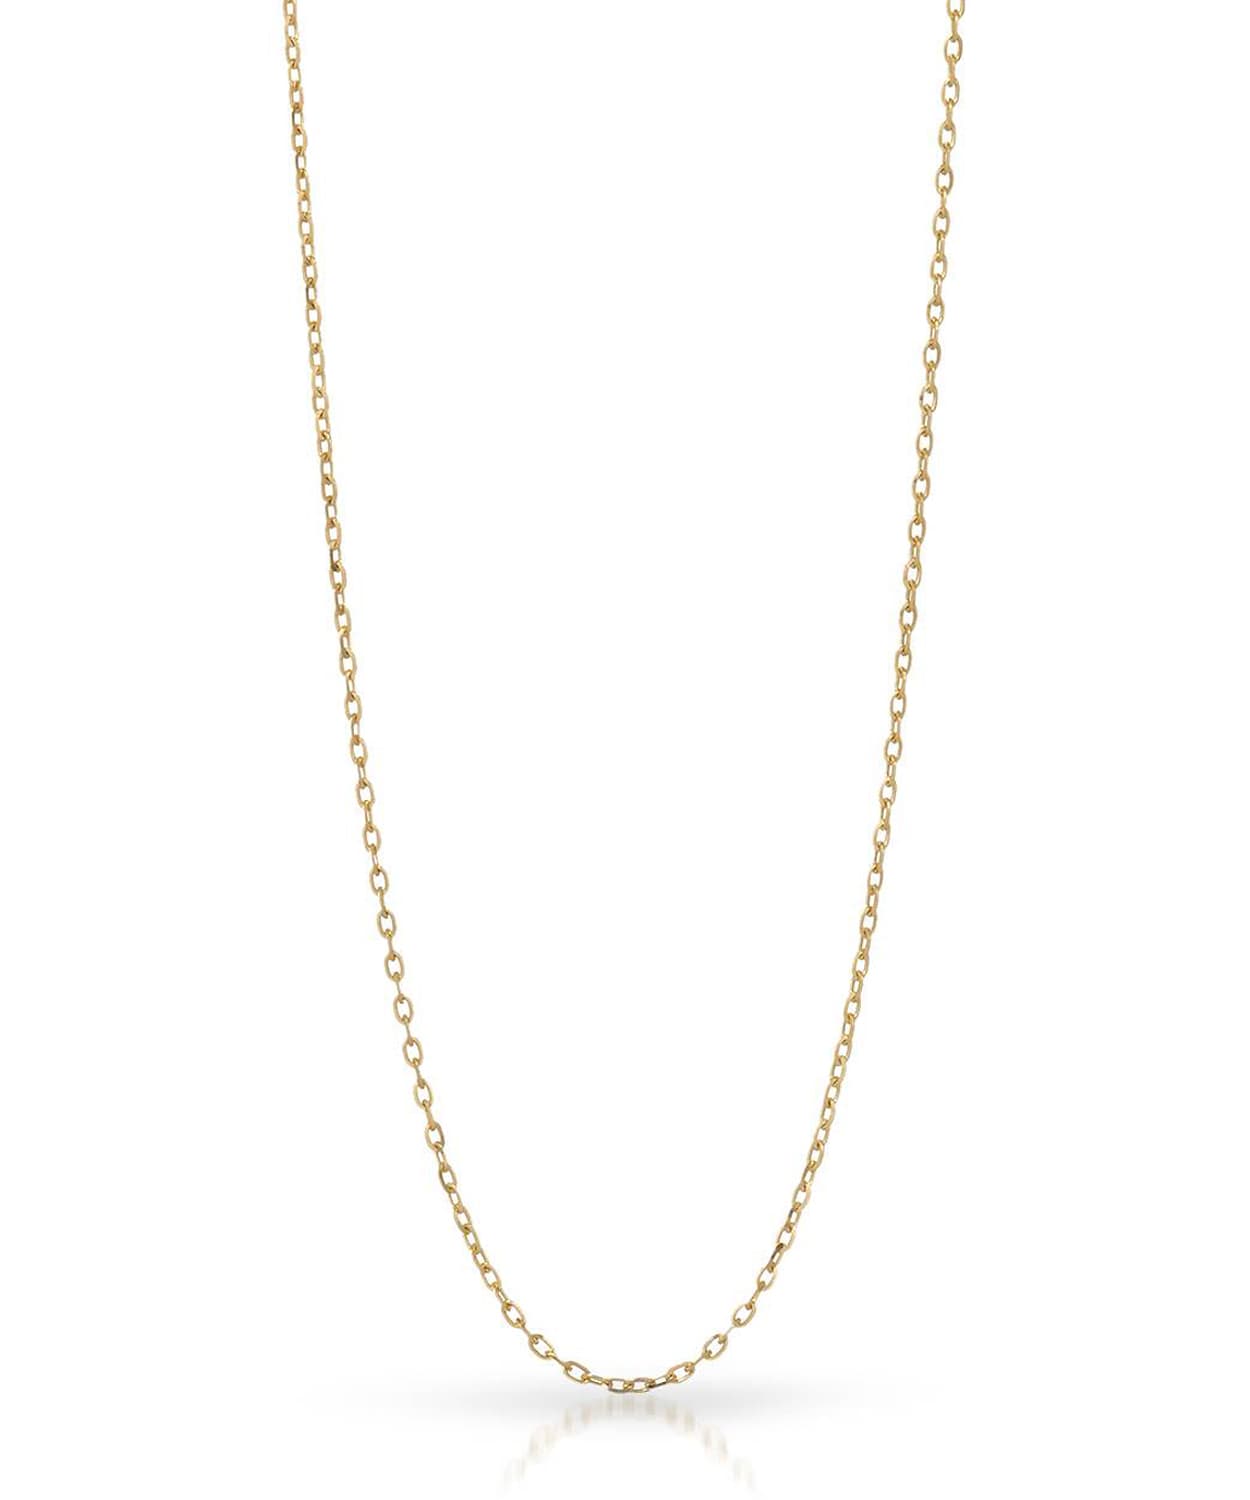 1.25mm 14k Yellow Gold Diamond Cut Oval Rolo Chain View 1